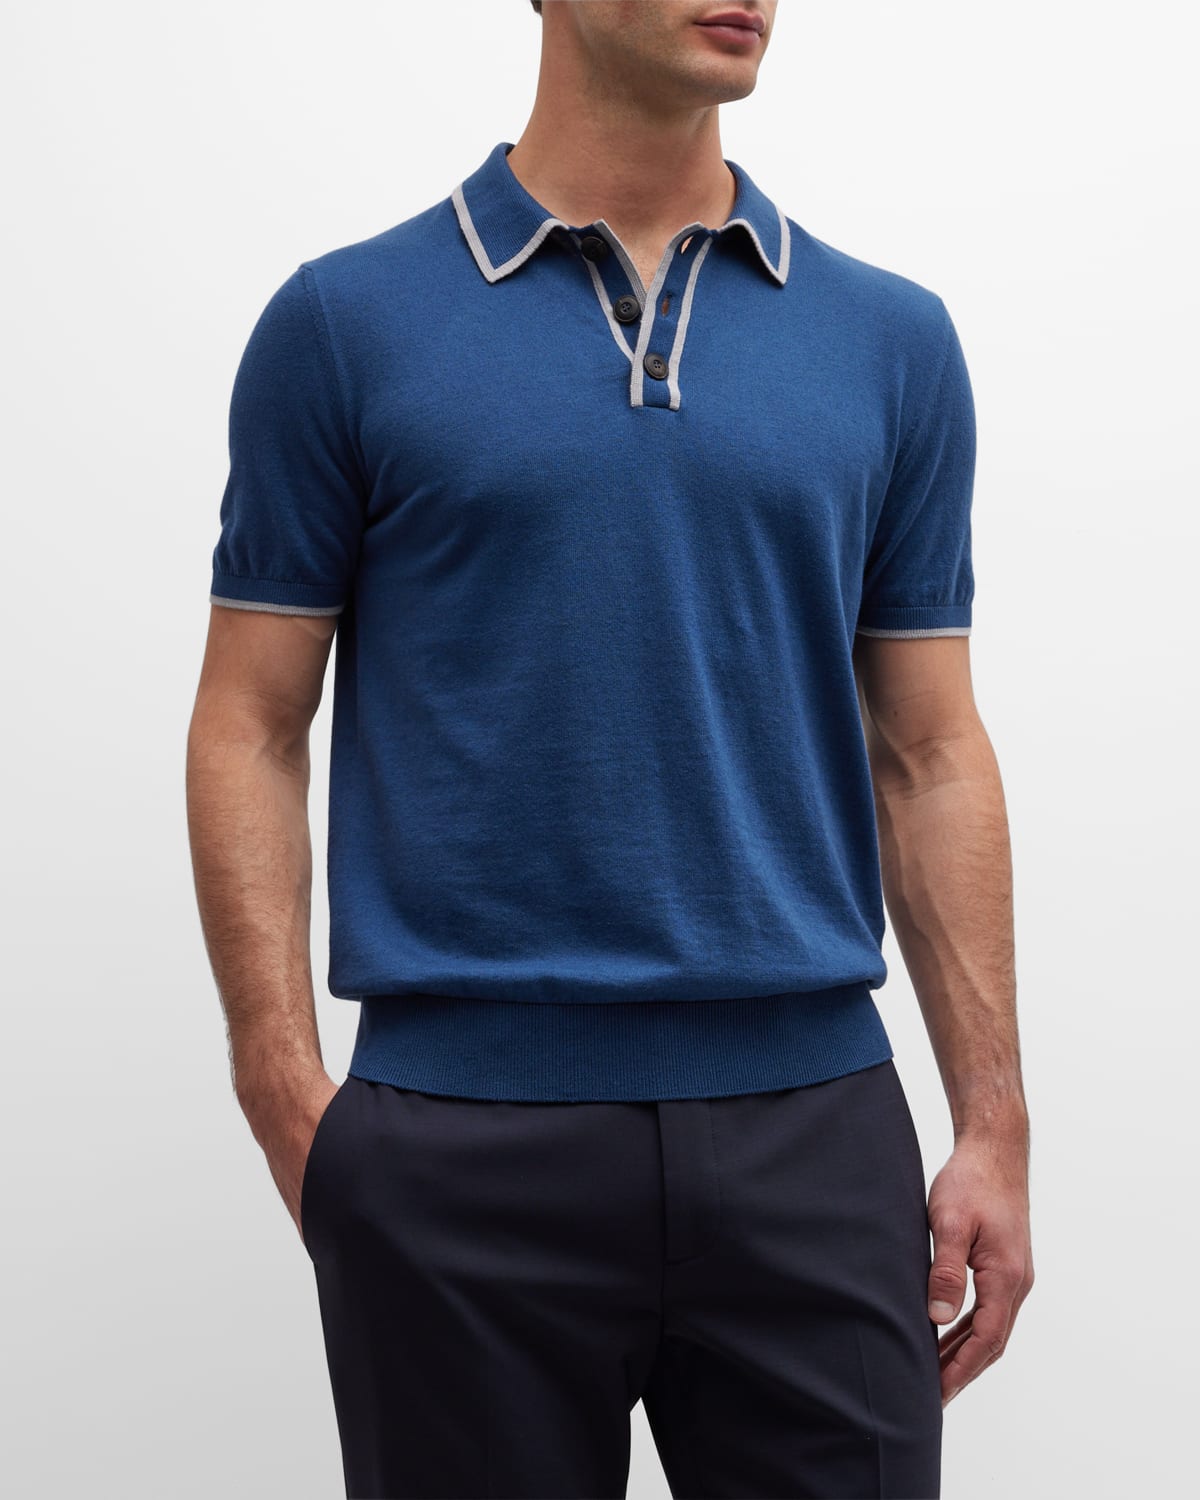 Men's Knit Polo Shirt with Tipping